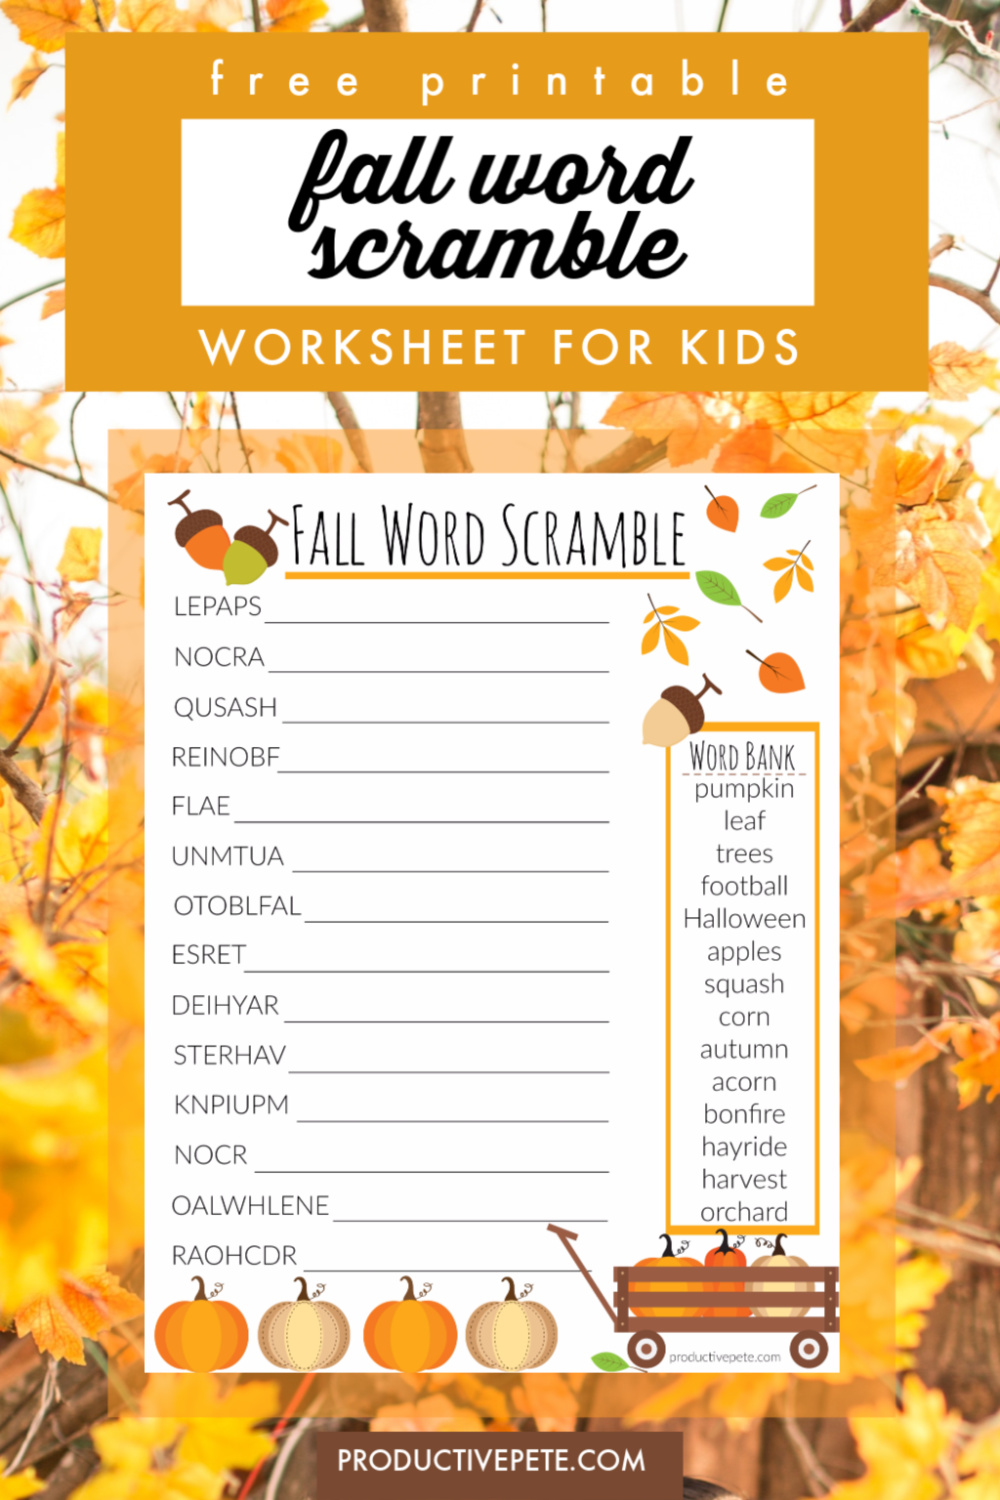 free-printable-word-jumble-puzzles-for-adults-free-printable